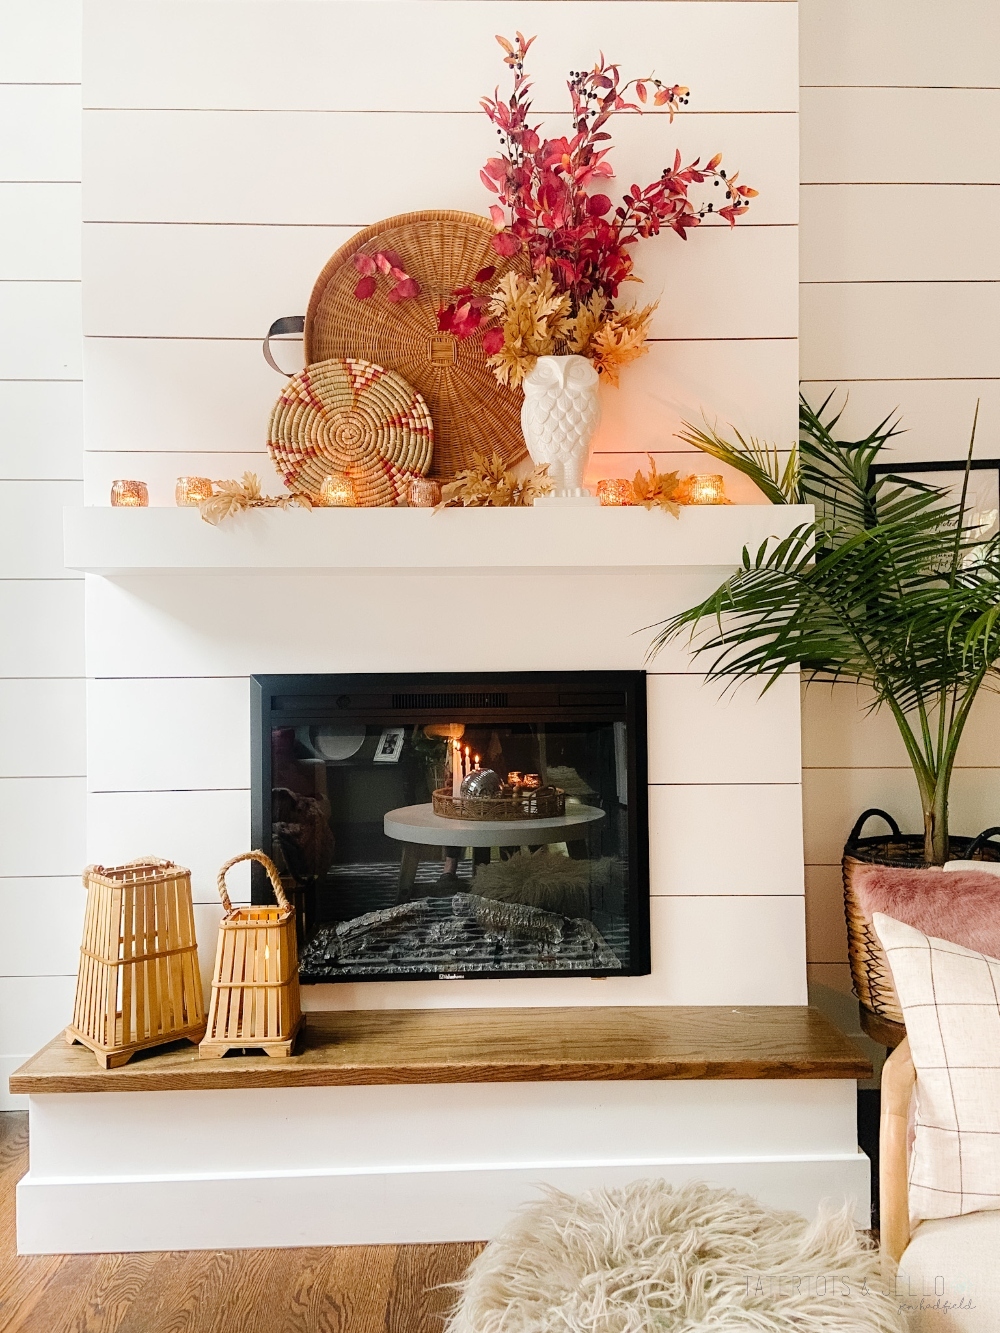 Easy Early Fall Decorating Ideas. Wondering how to transition from summer to early Fall? Here are some easy ideas with no pumpkins! 